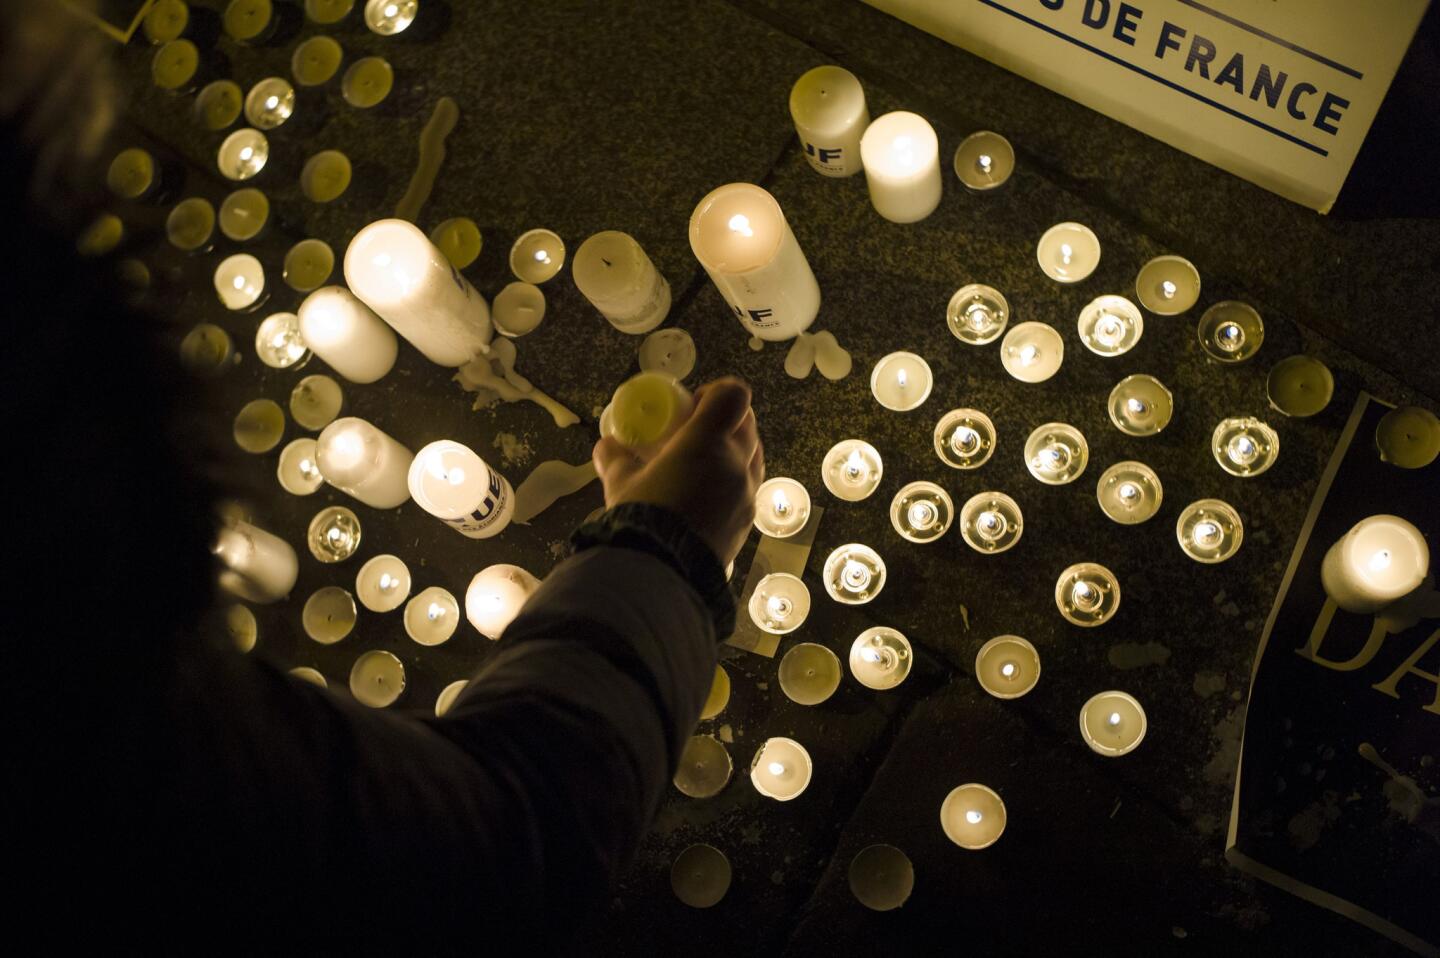 People light candles in front of the Danish embassy in Paris on Feb. 15 to pay tribute after the terrorist attacks in Copenhagen, Denmark.